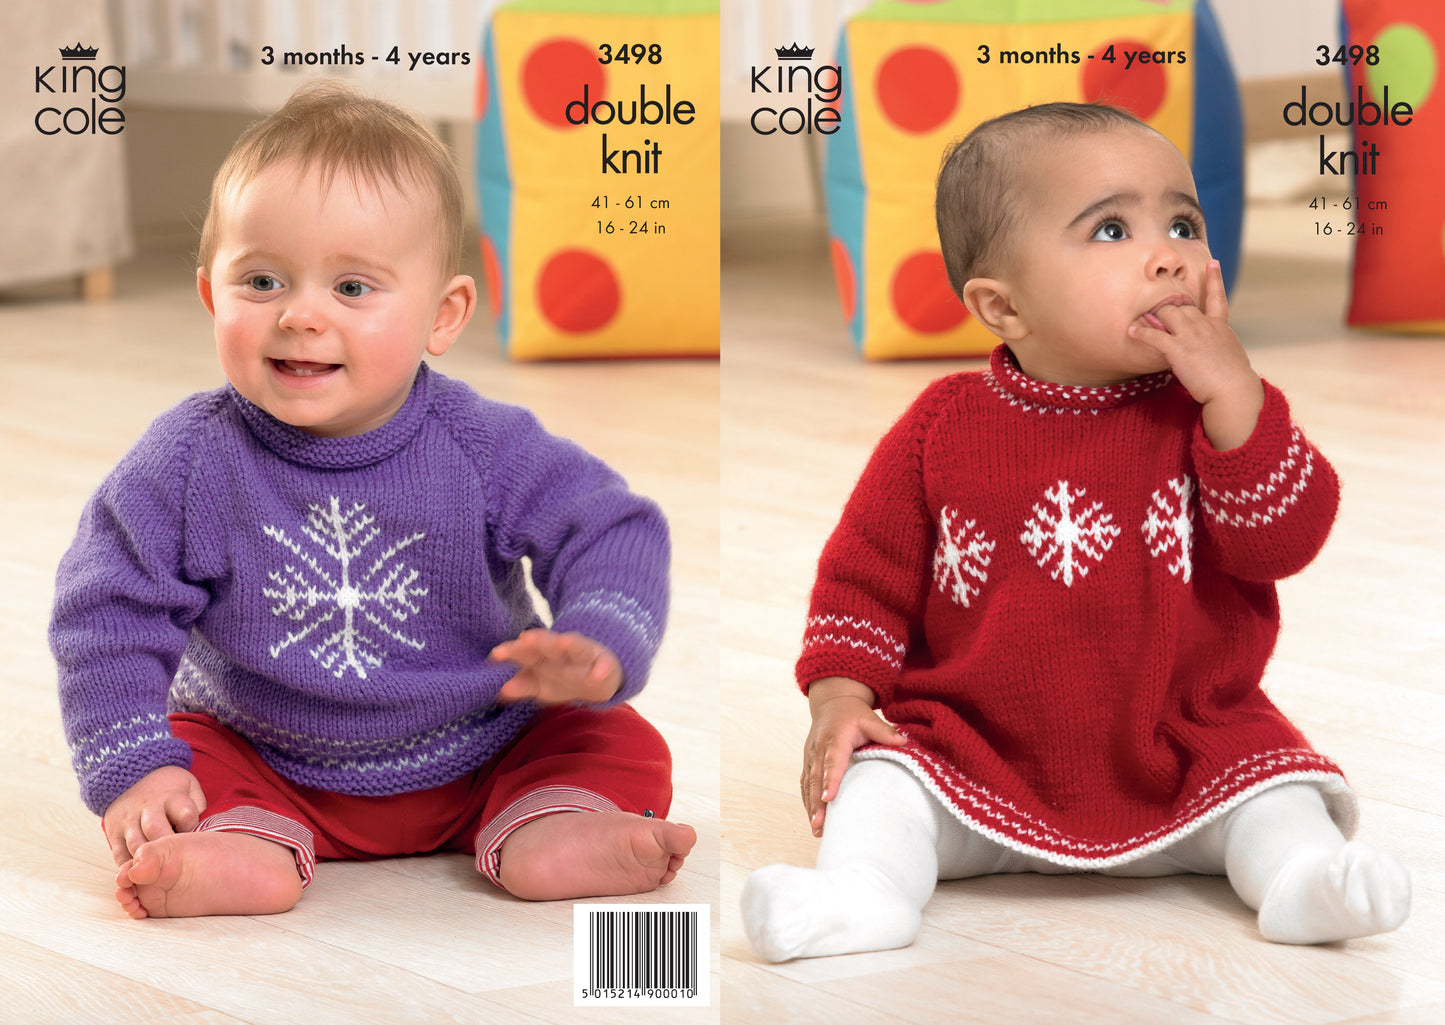 King Cole - Snowflake Christmas Dress and Sweater Pattern 3498